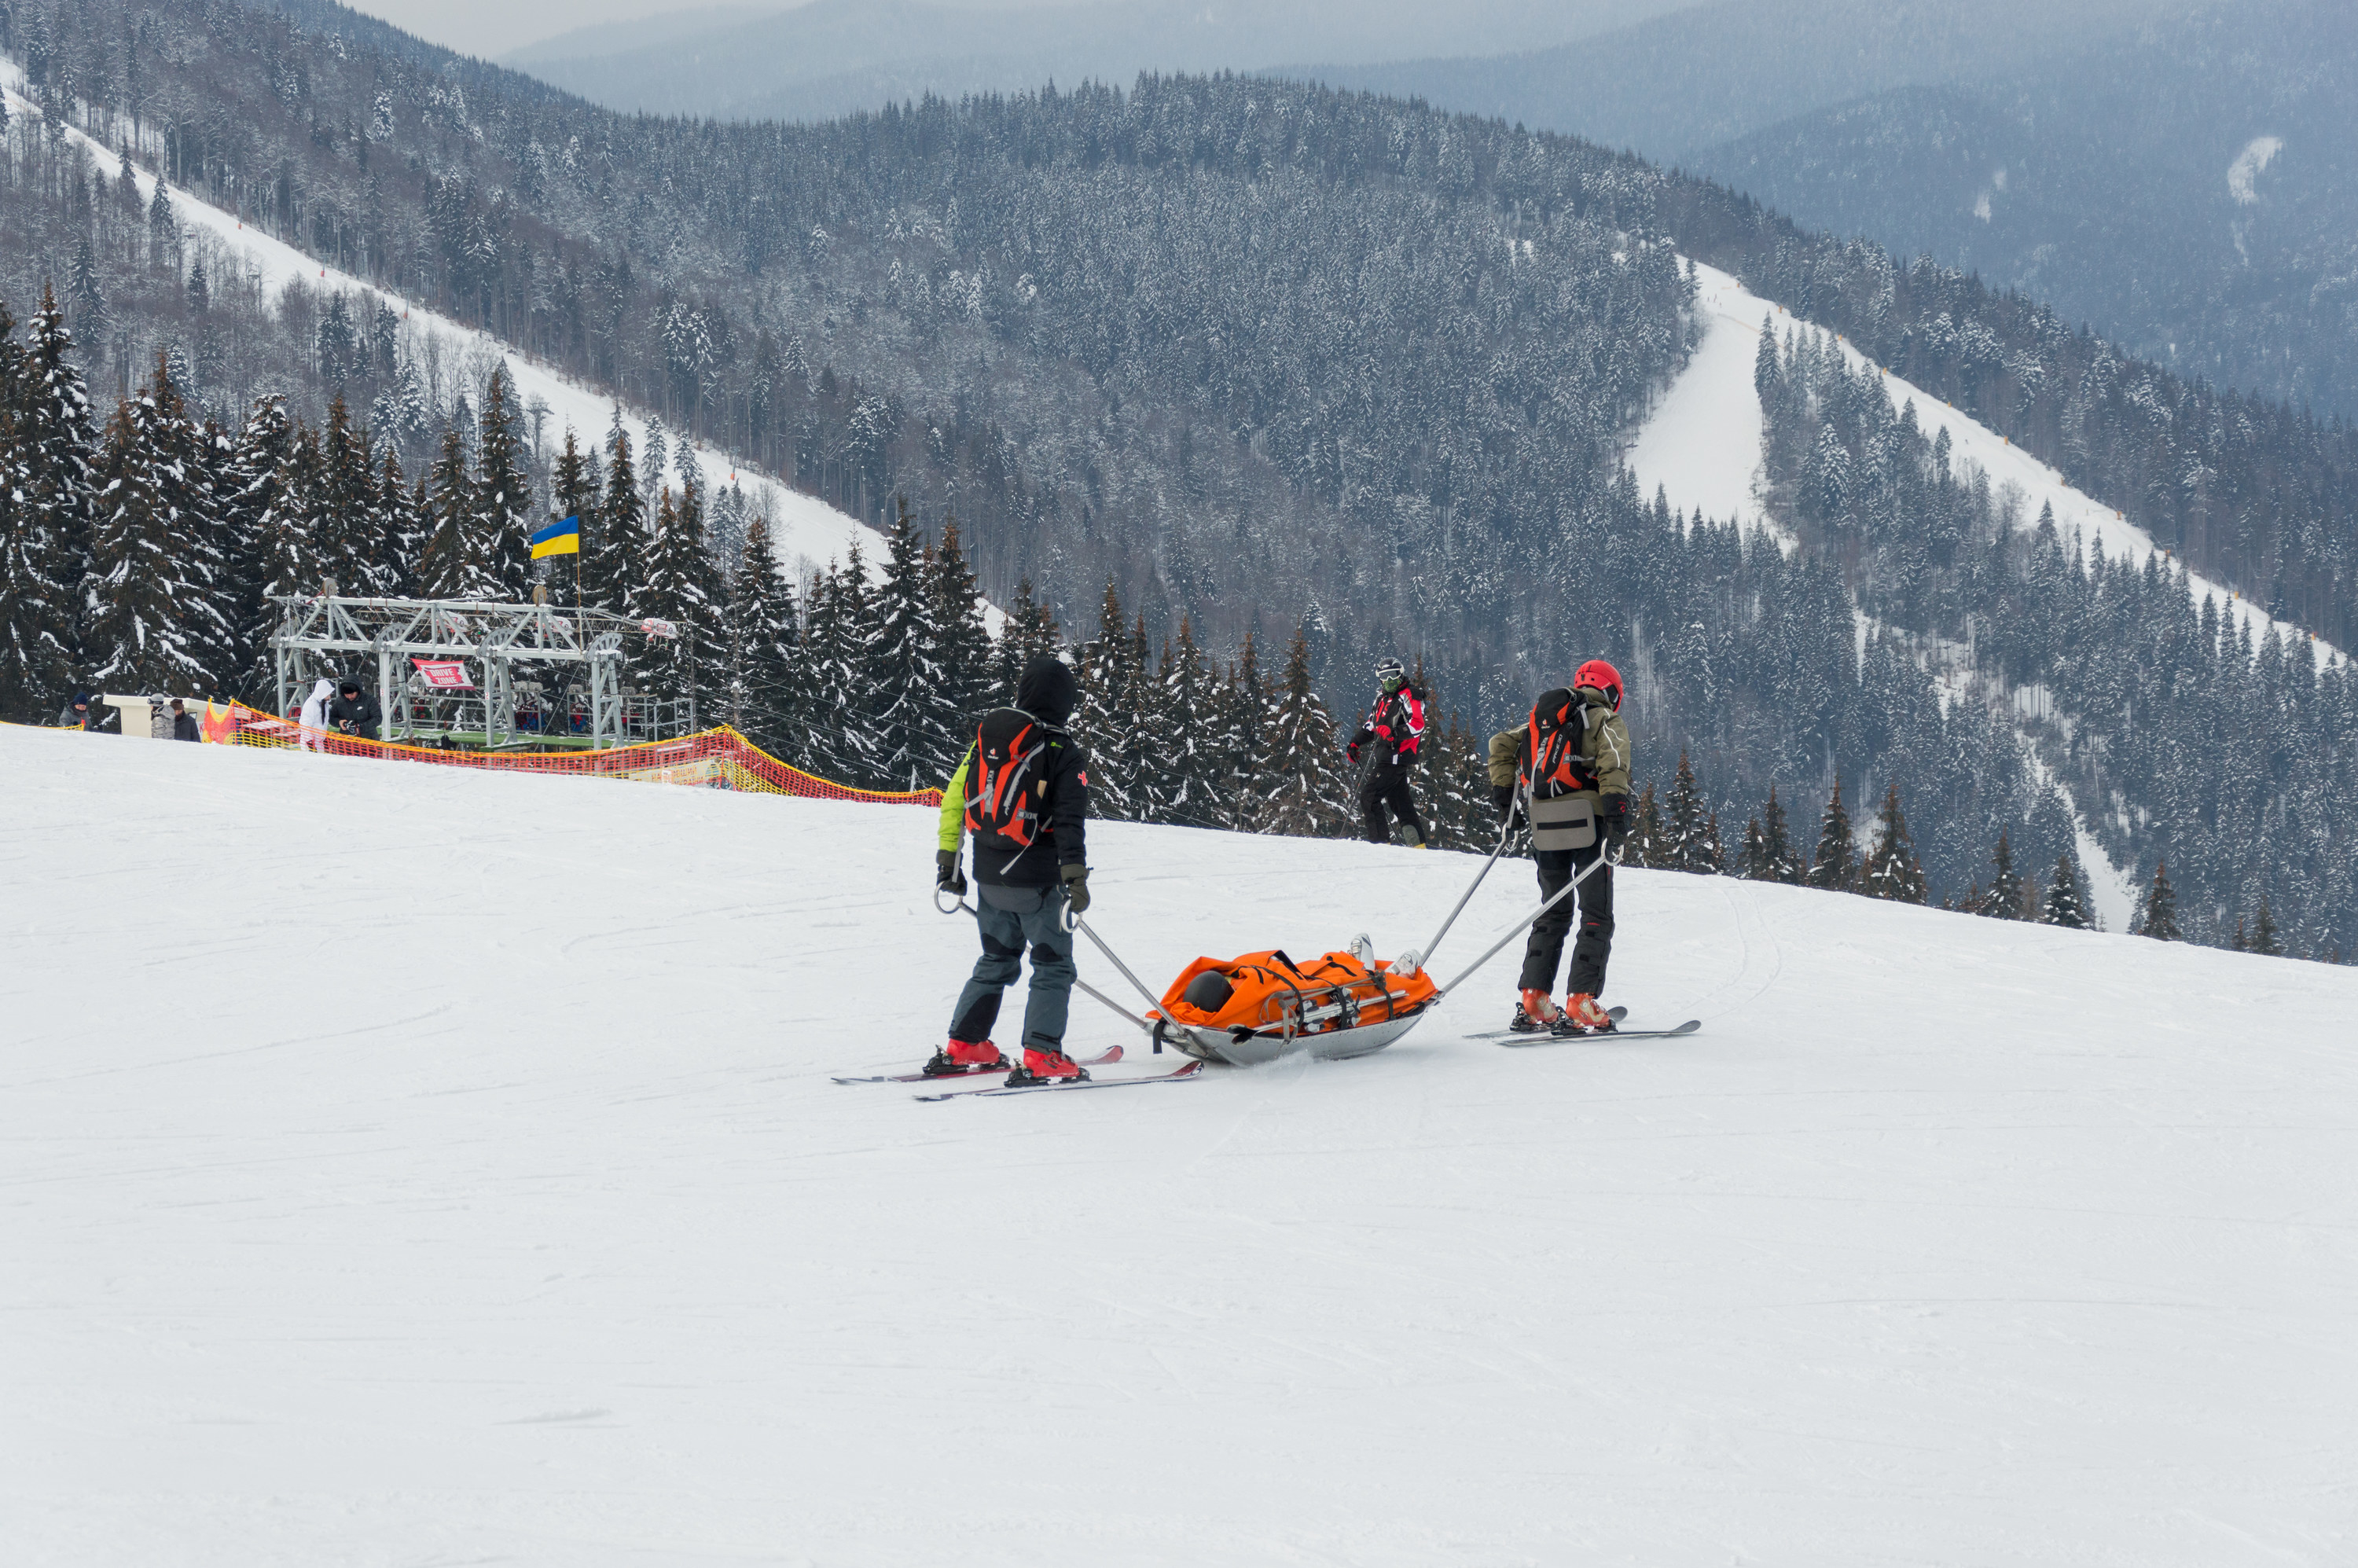 Ski patrol team rescue injured skier with the special emergency sledges in the Carpathian mountains region